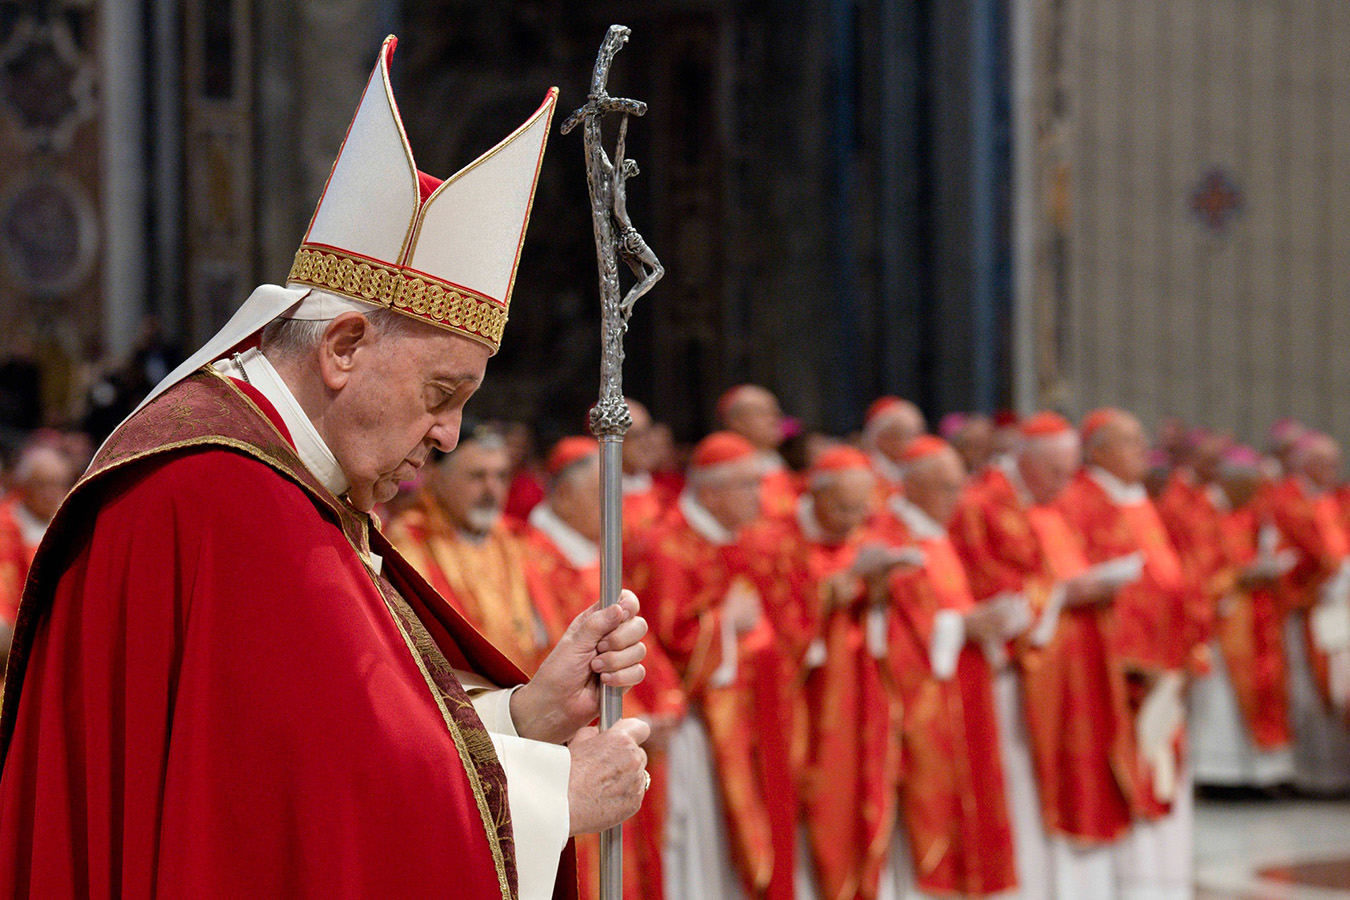 Pope Francis pens letter on liturgy after Traditionis custodes